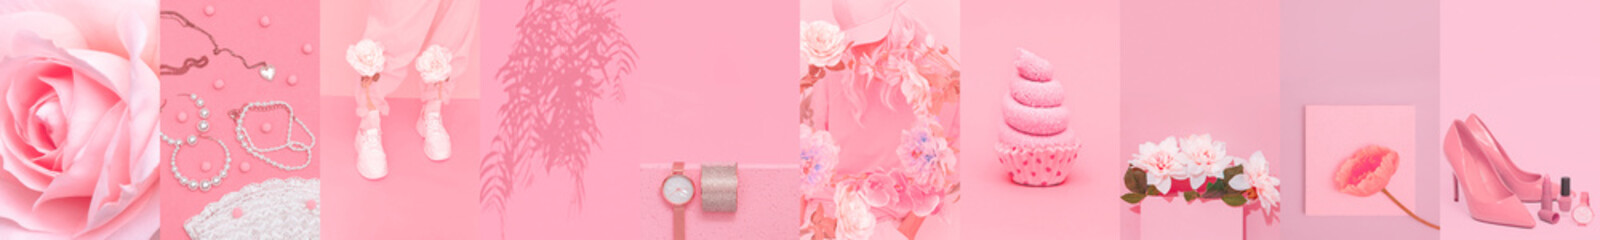 Set of trendy aesthetic photo collages. Minimalistic images of one top color.  Pastel Pink moodboard